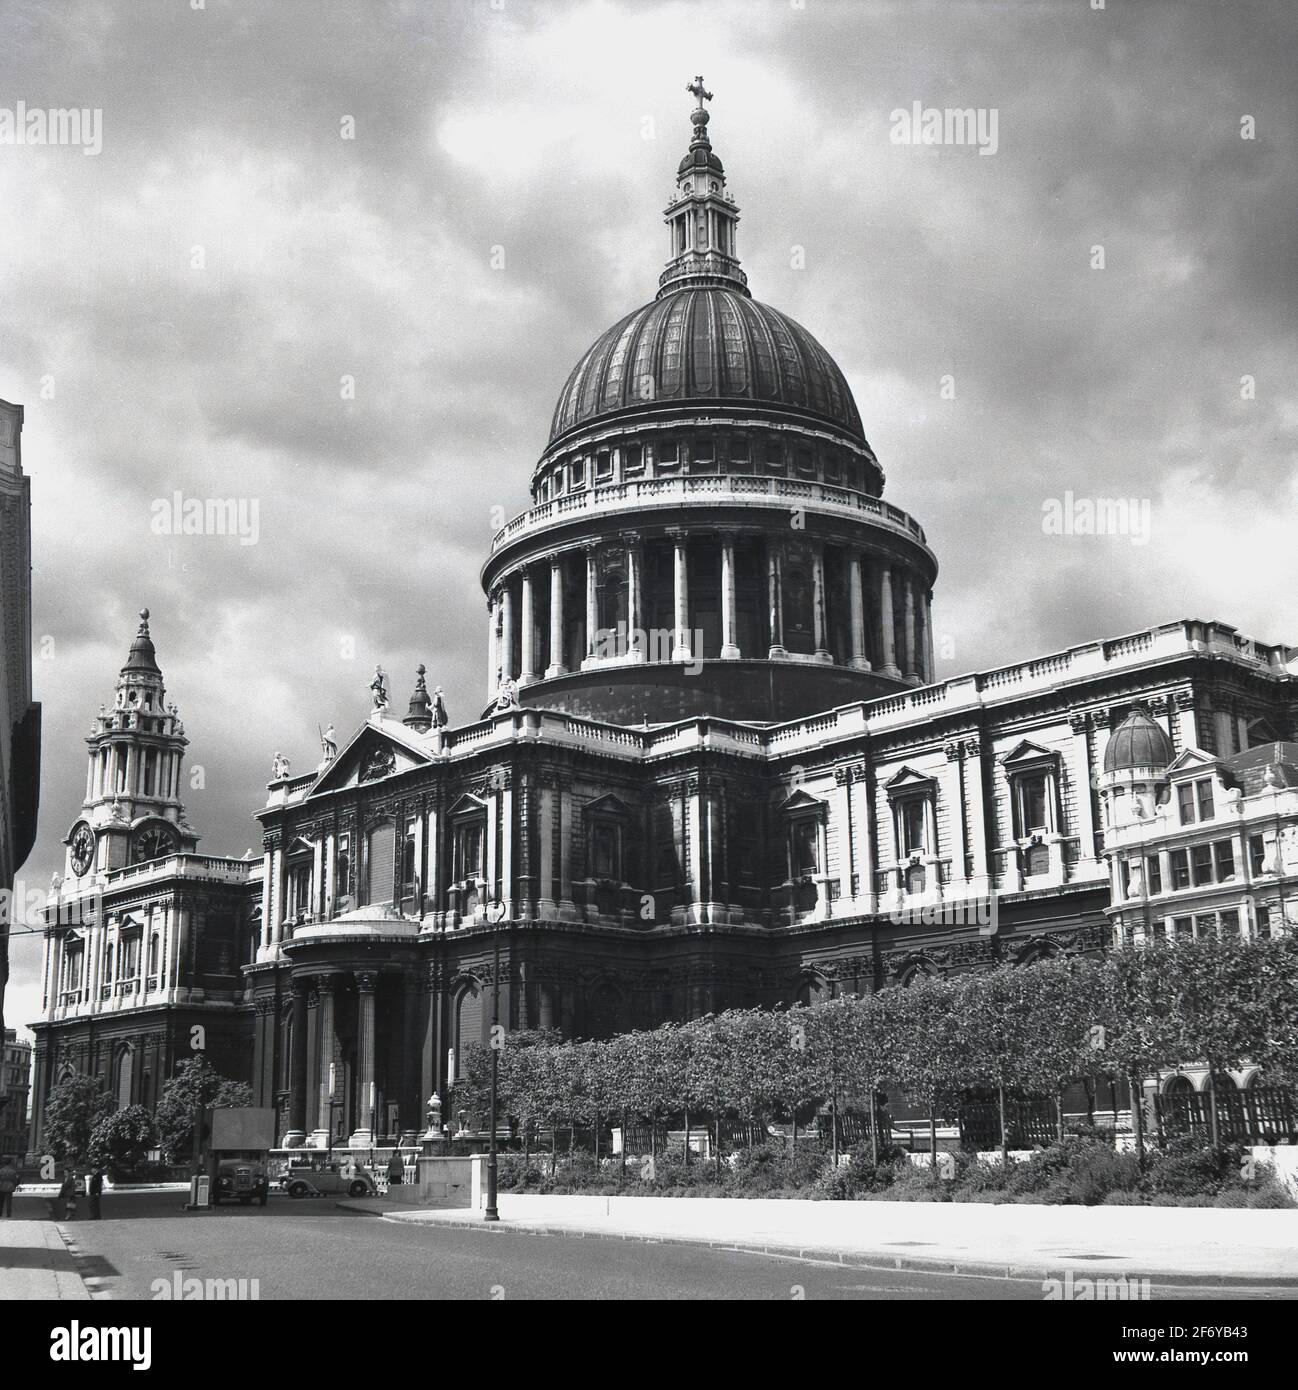 1950s, historical, exterior view of a post-war soot covered St Pauls cathedral, London, England, UK. Designed by Christopher Wren and famous for its dome, it was built in the English baroque style of architecture and stands at Ludgate Hill, the highest point in the City of London. The church of the Bishop of London, construction started in 1675 and at 365 feet was the tallest building in London until 1963. Thankfully the building survived the Blitz of the city during WW2. Stock Photo